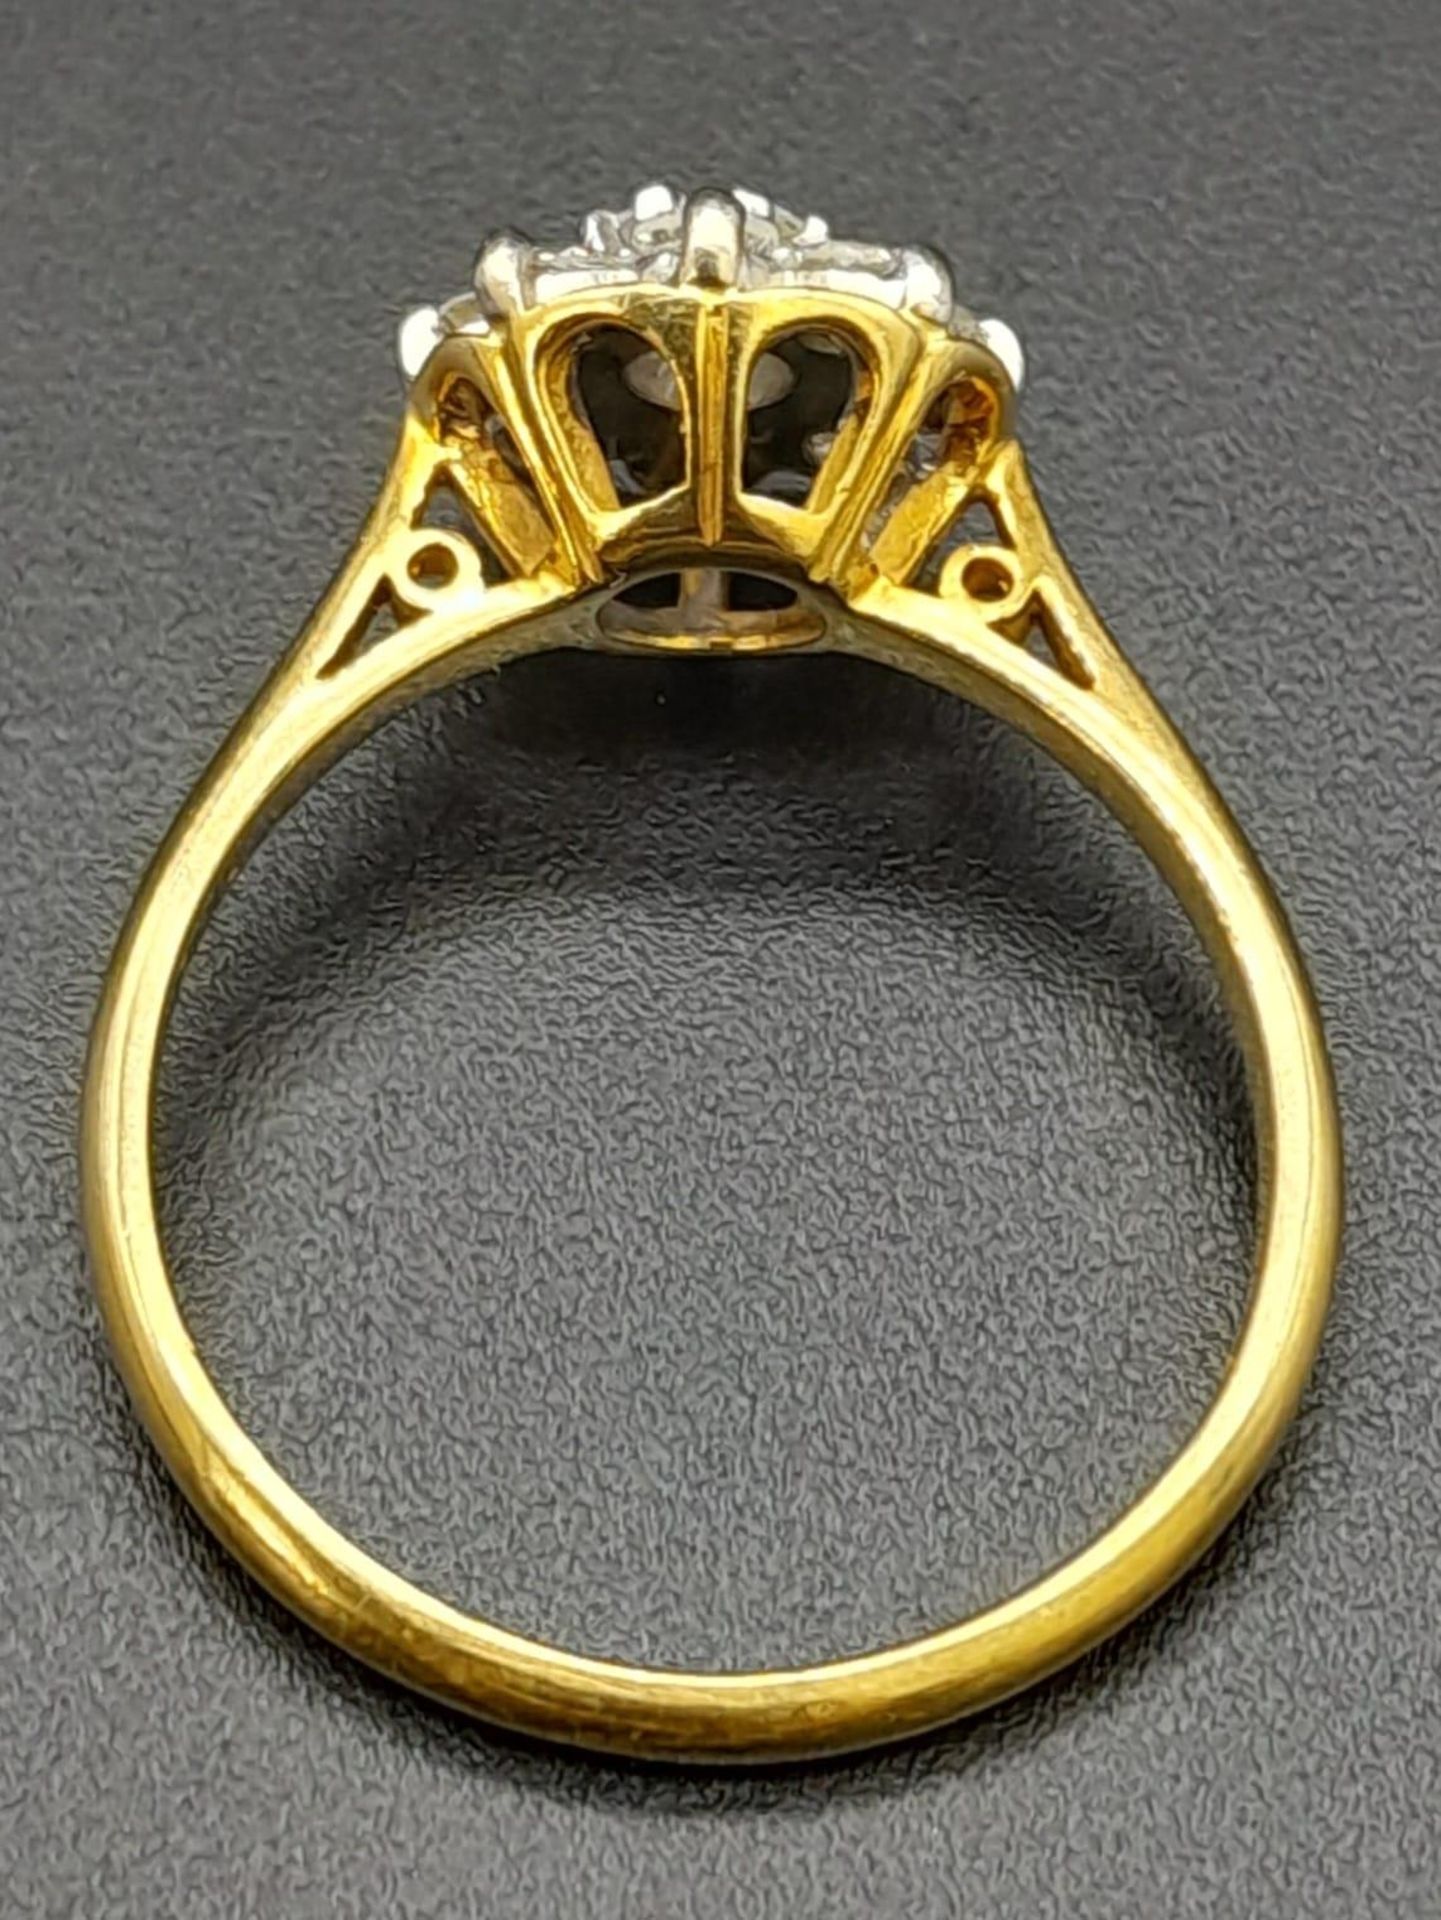 A 18K YELLOW GOLD DIAMOND CLUSTER RING 0.40CT. TOTAL WEIGHT 3.35G. SIZE N. - Image 4 of 5